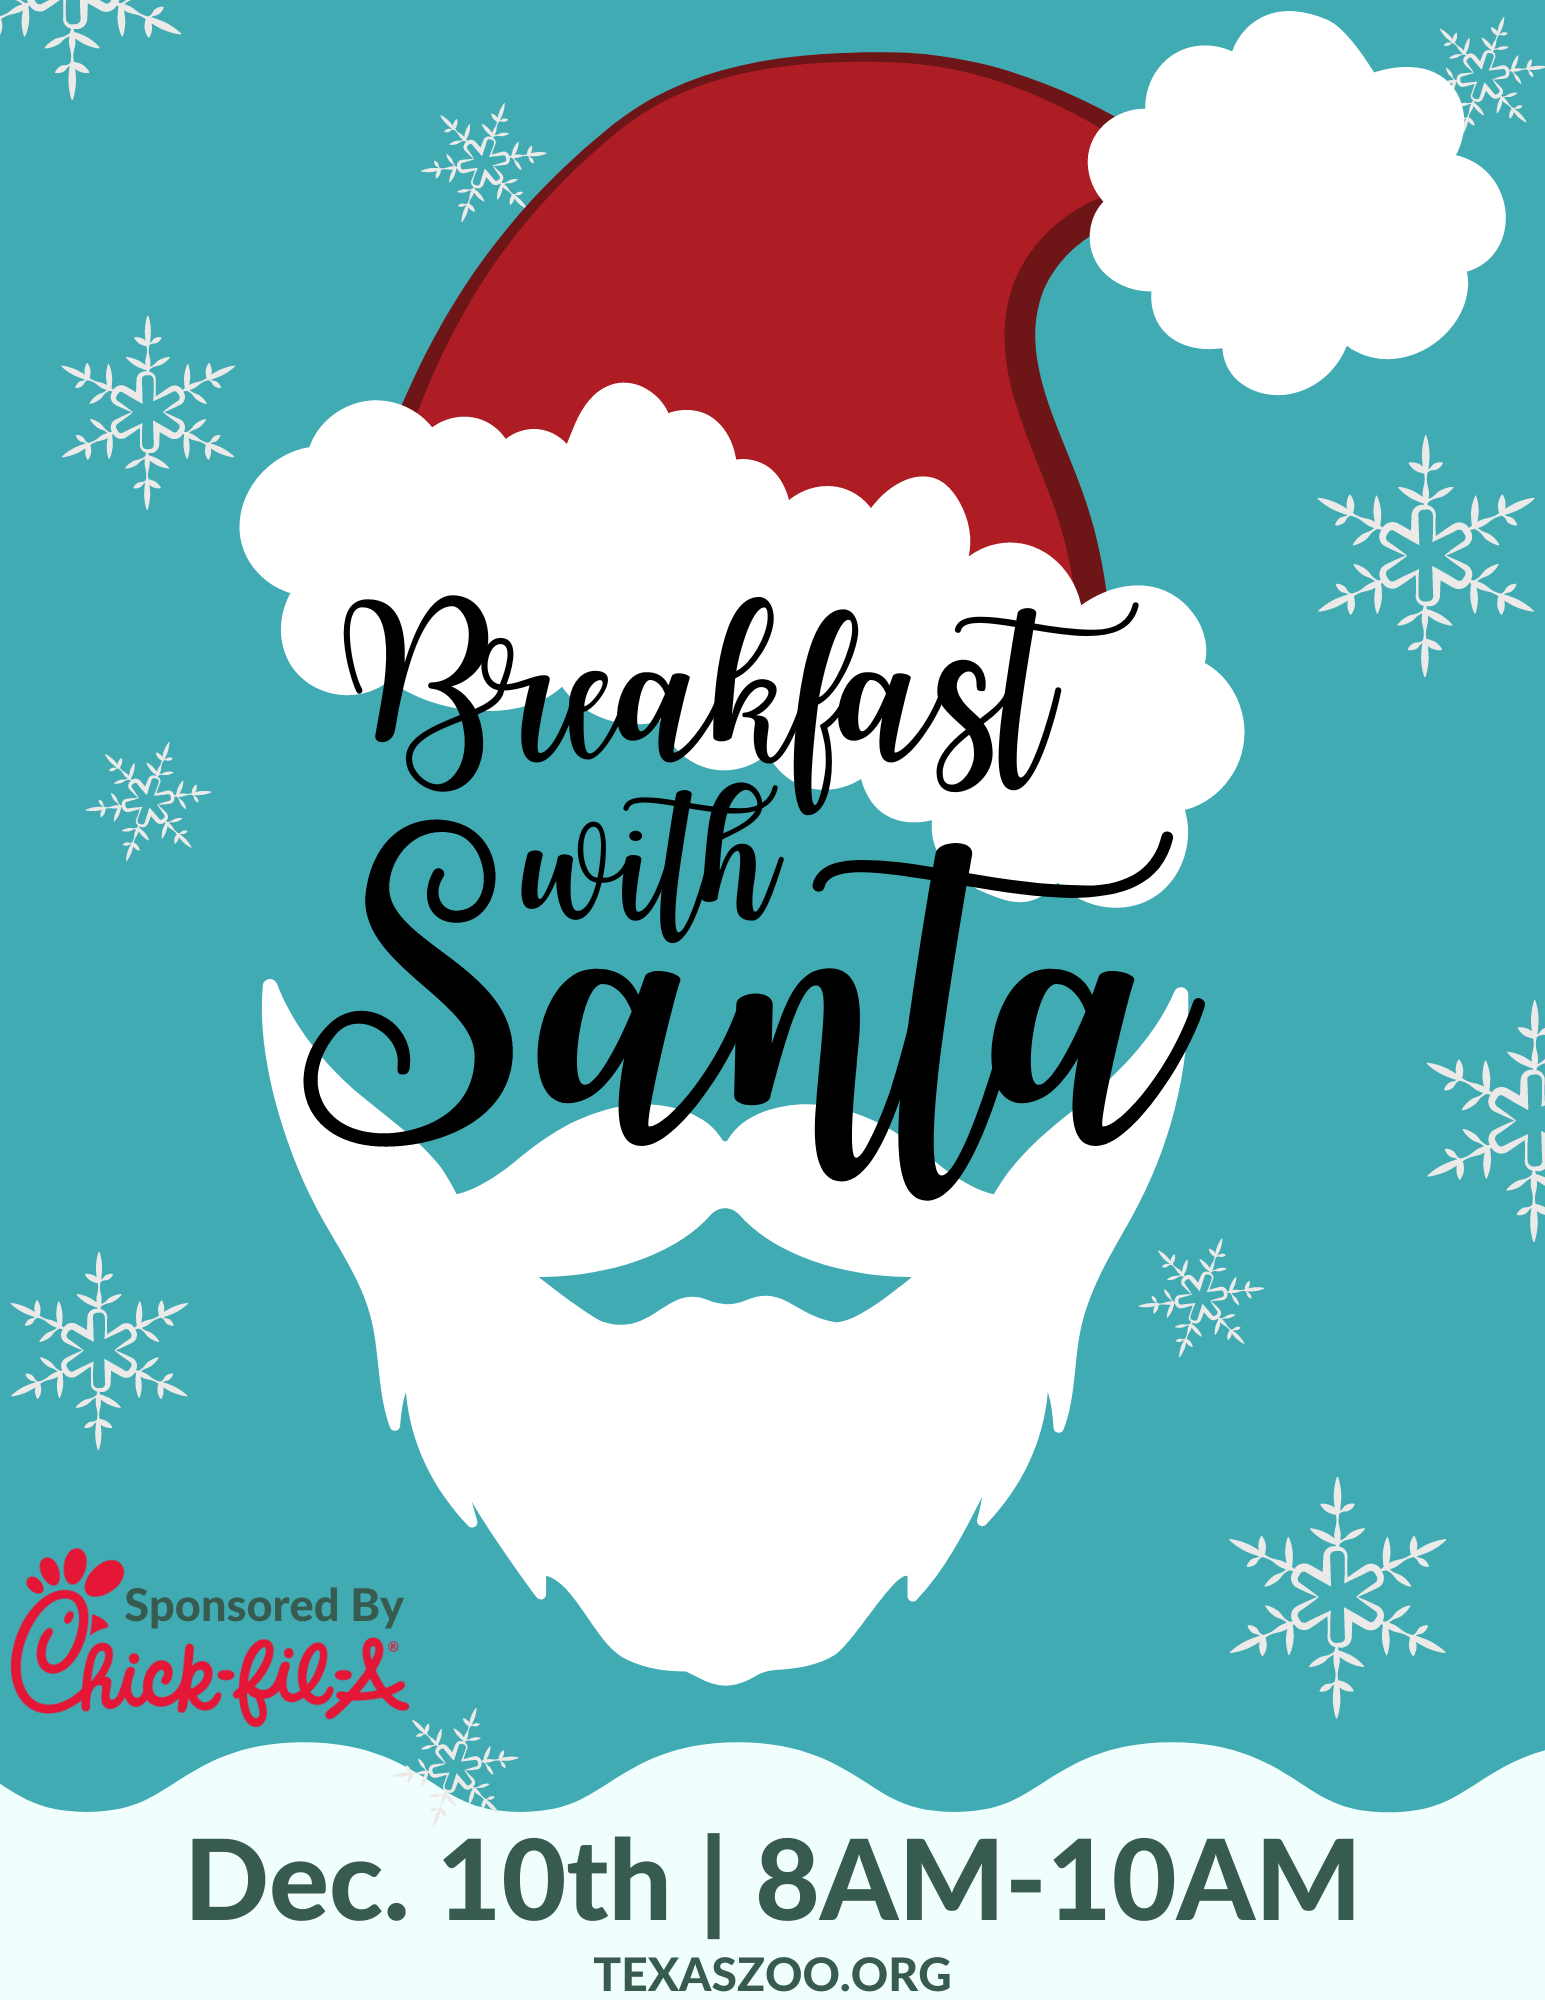 Breakfast with Santa Flyer.png